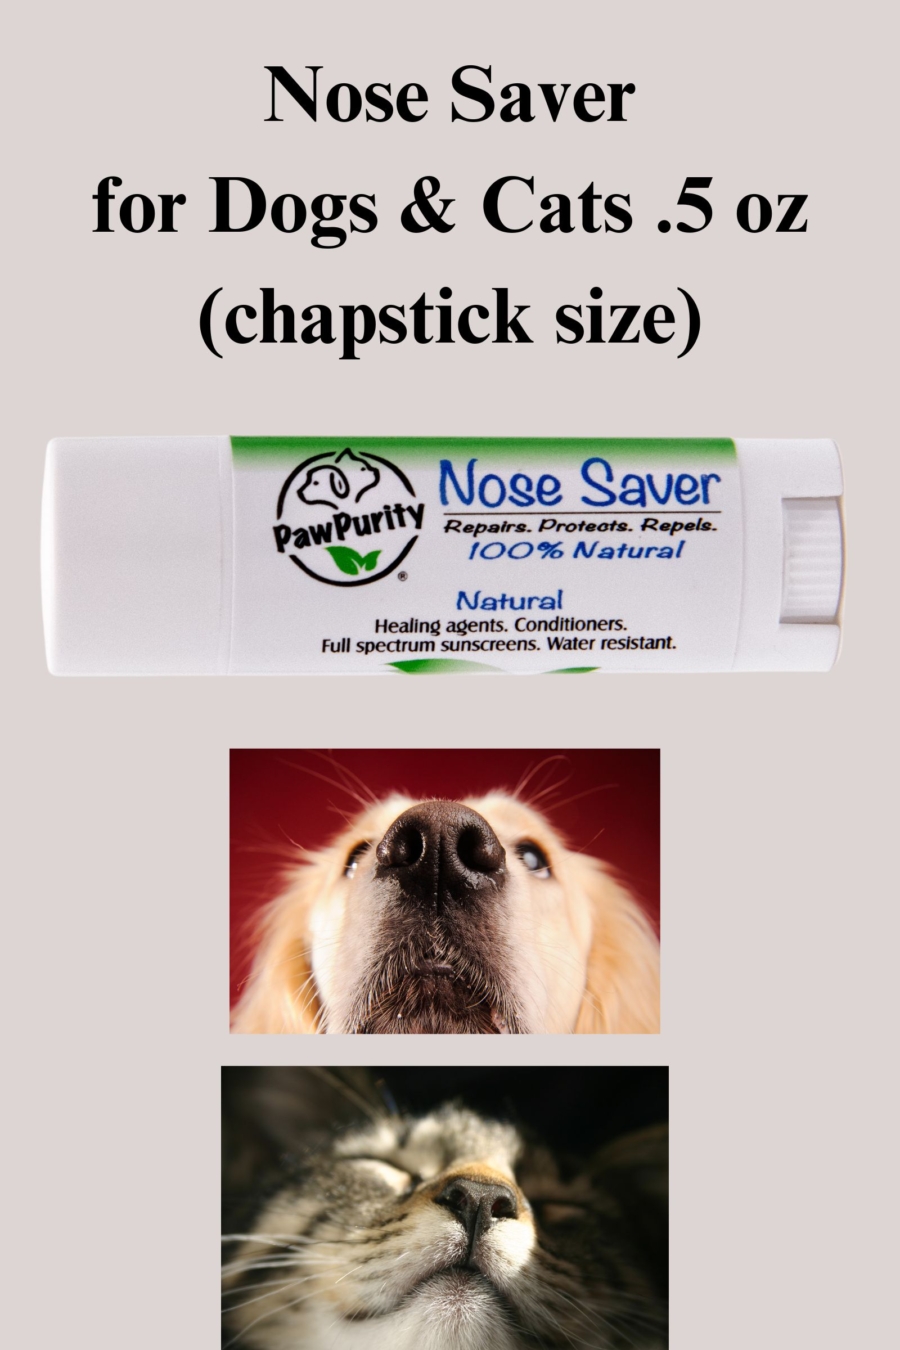 Image of Nose Saver by PawPurity with a dog and cat